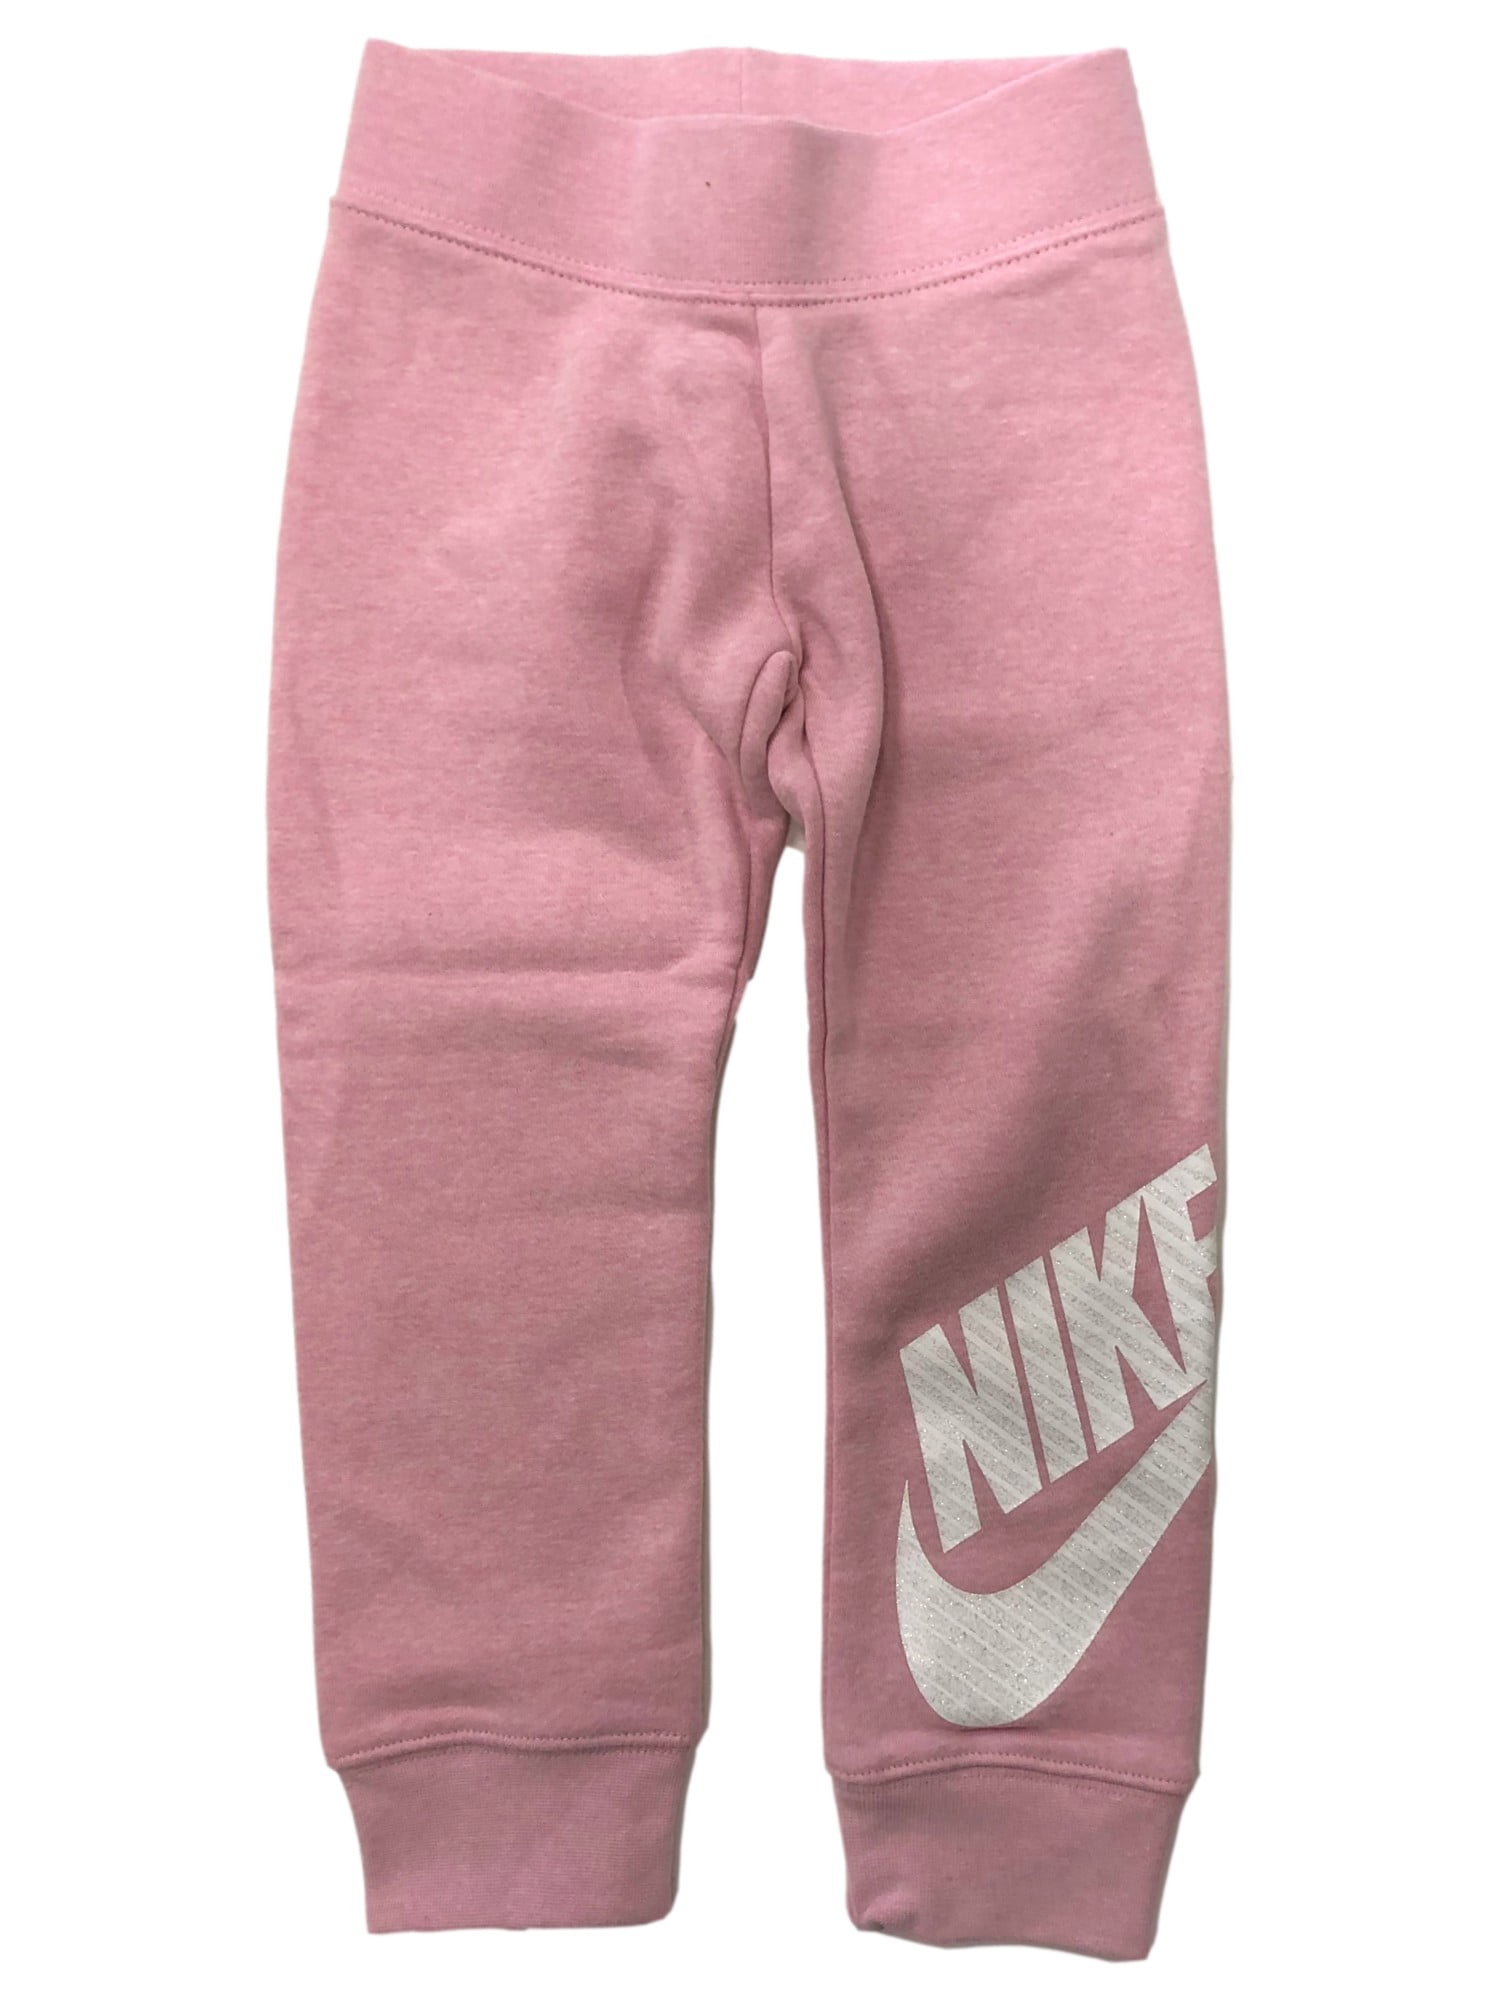 Nike Girls Pink Athletic Joggers Stretch Sweat Pants 4 